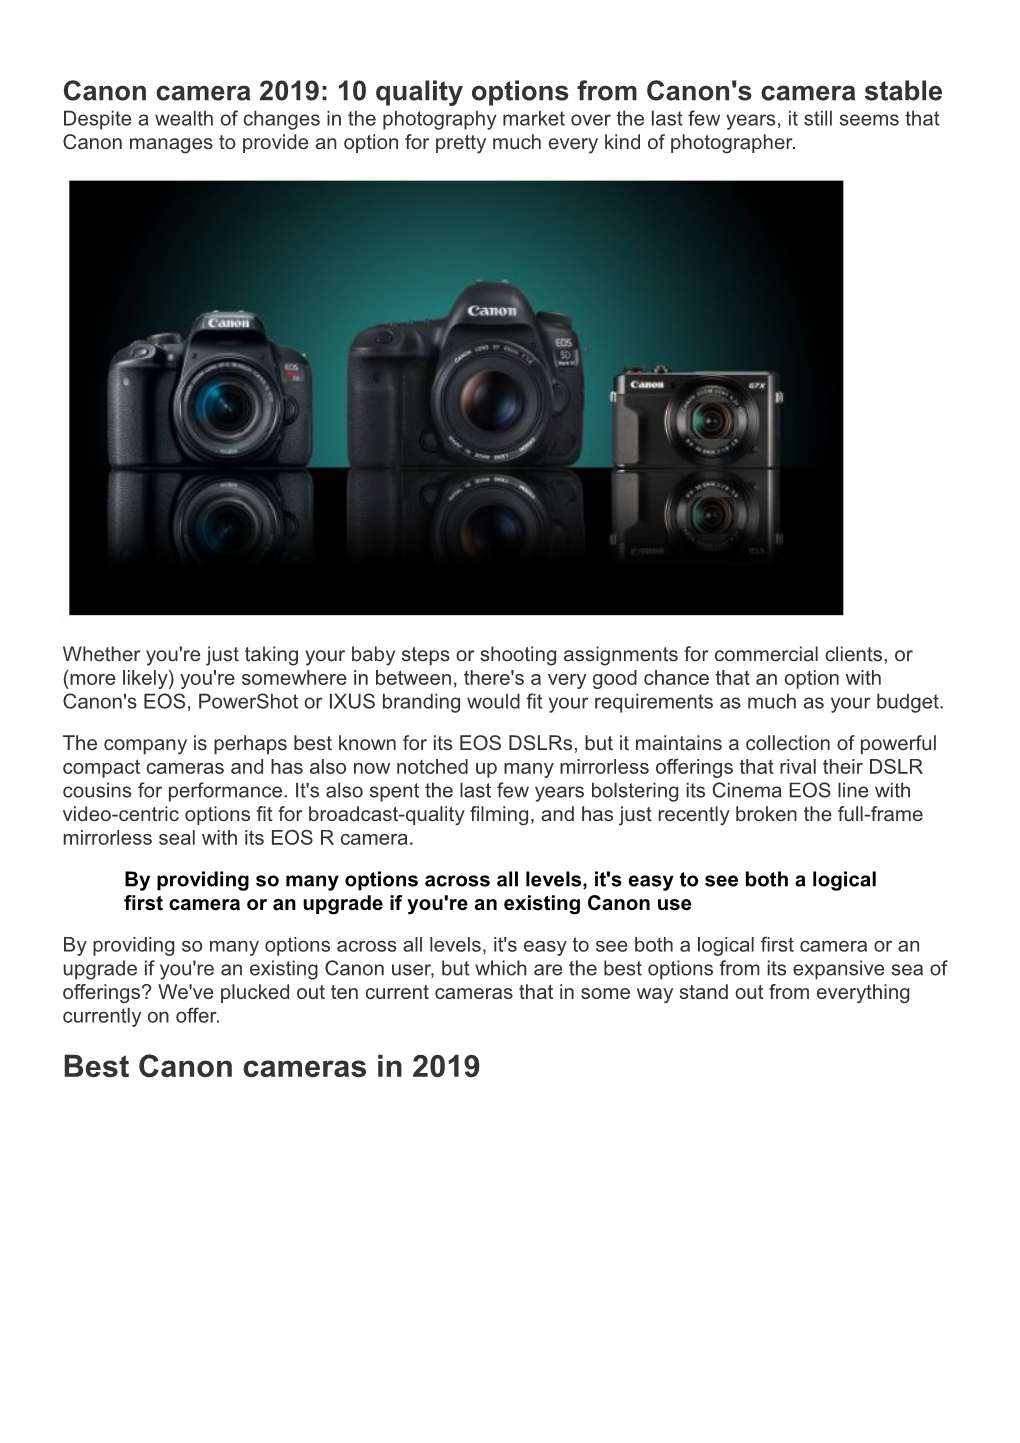 Canon Camera 2019 10 Quality Options from Canon's Camera Stable